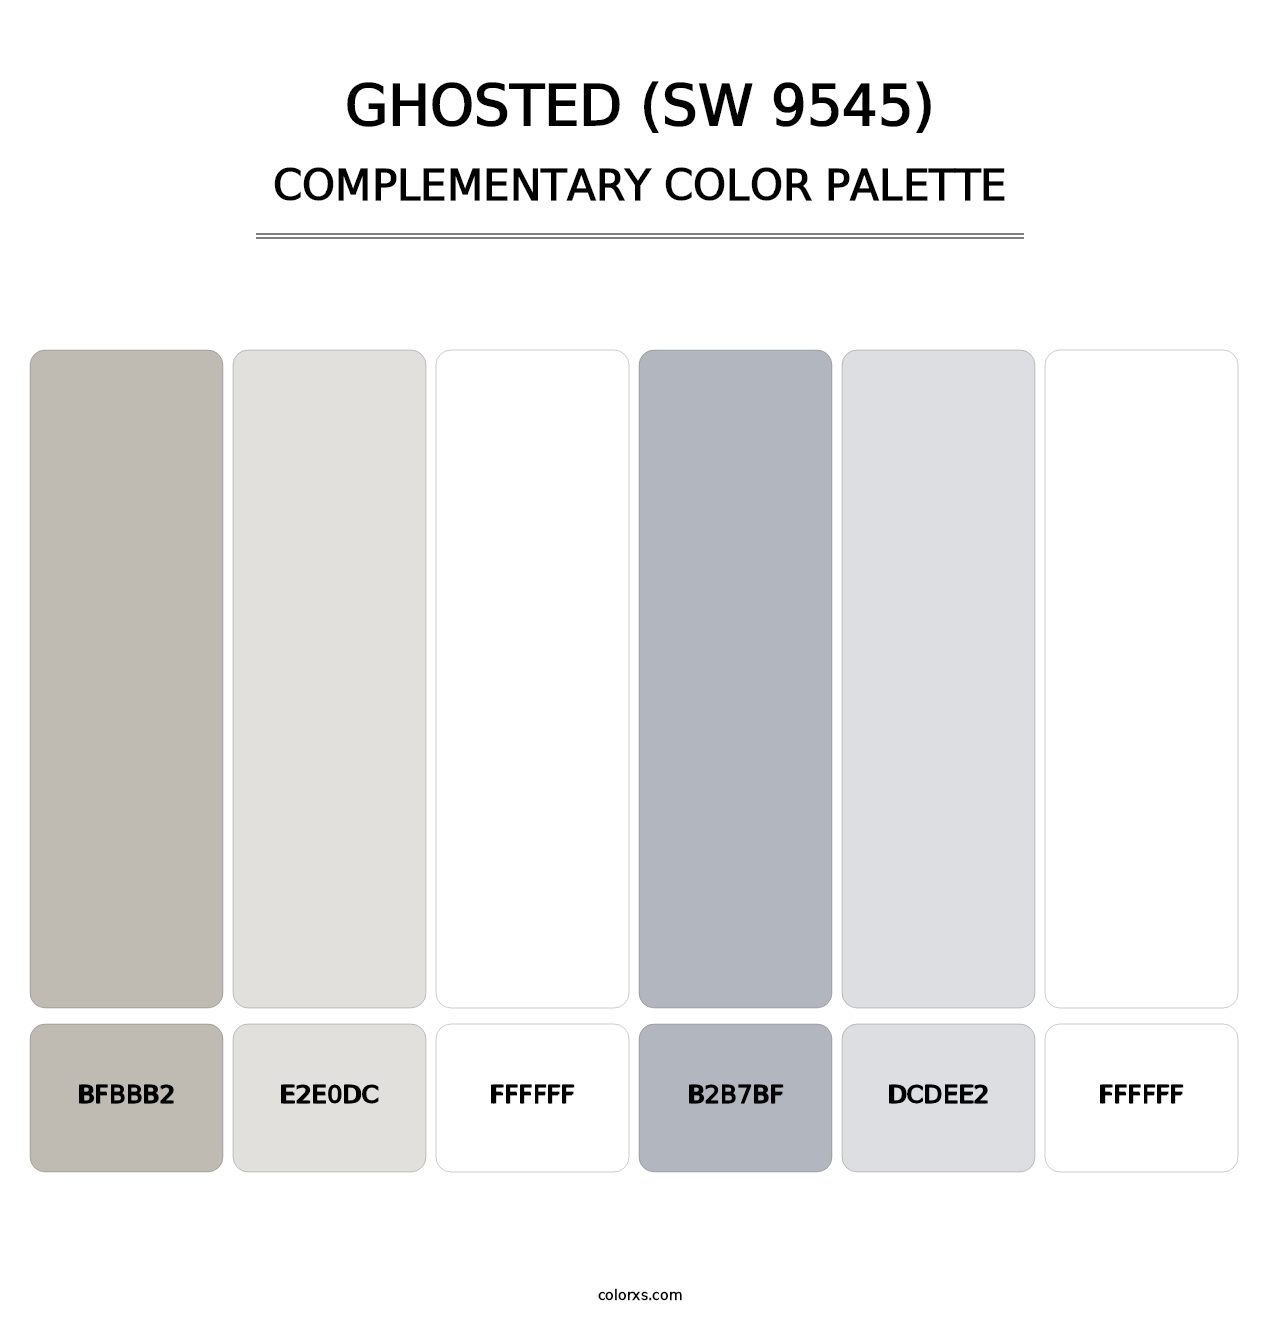 Ghosted (SW 9545) - Complementary Color Palette